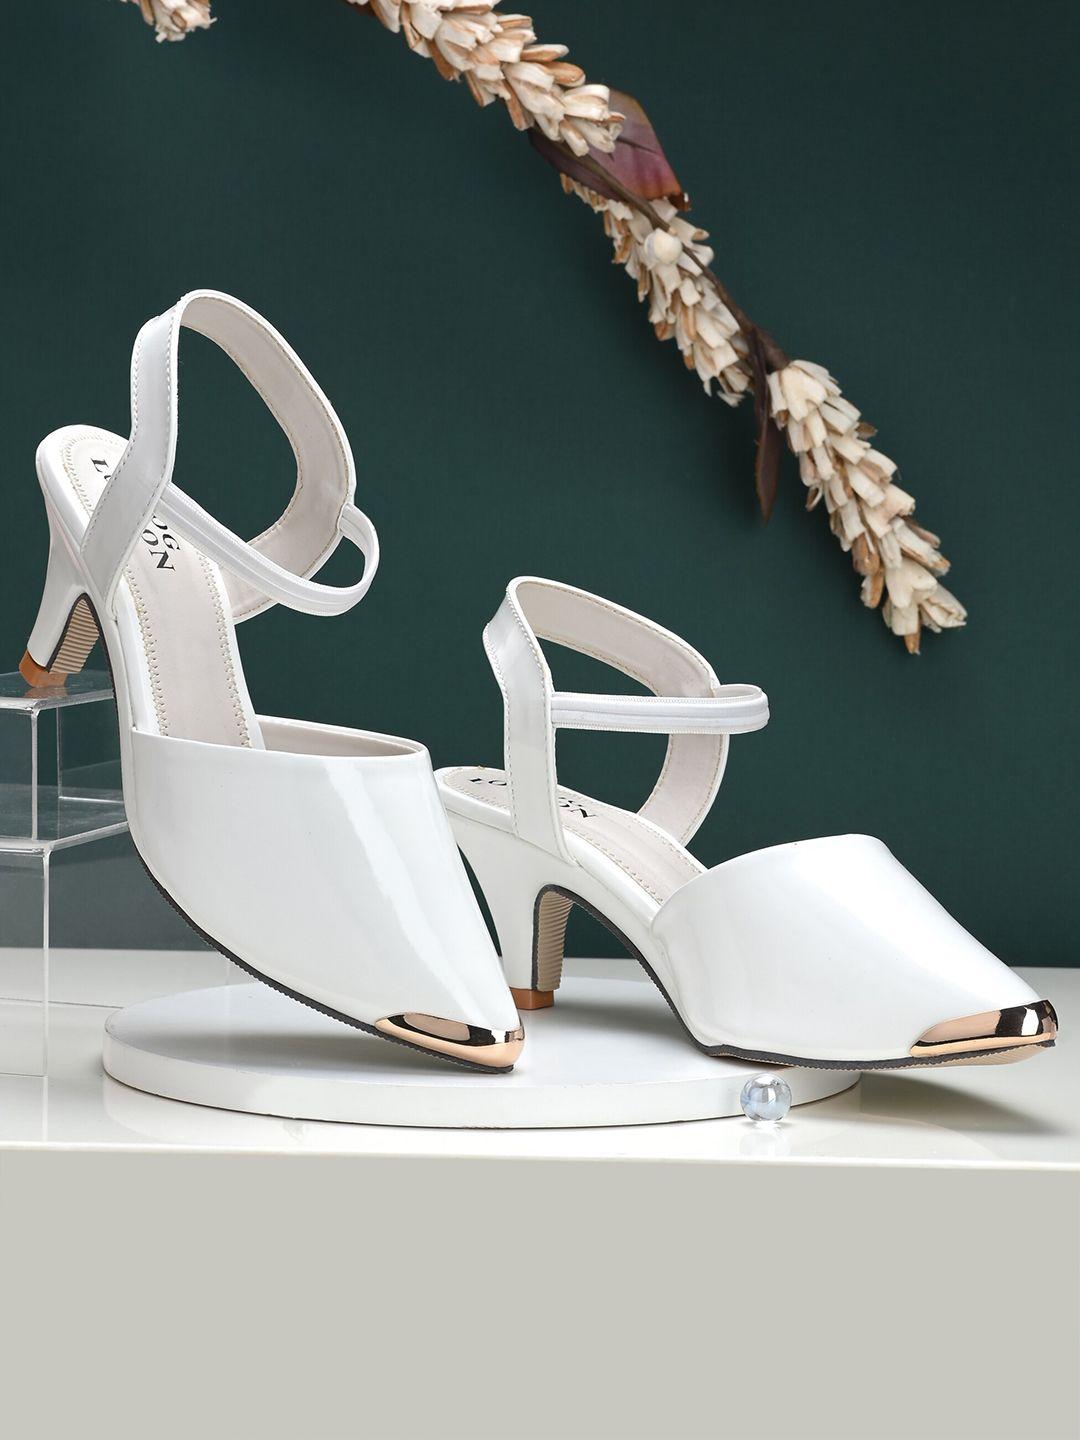 clog-london-white-stiletto-pumps-with-buckles